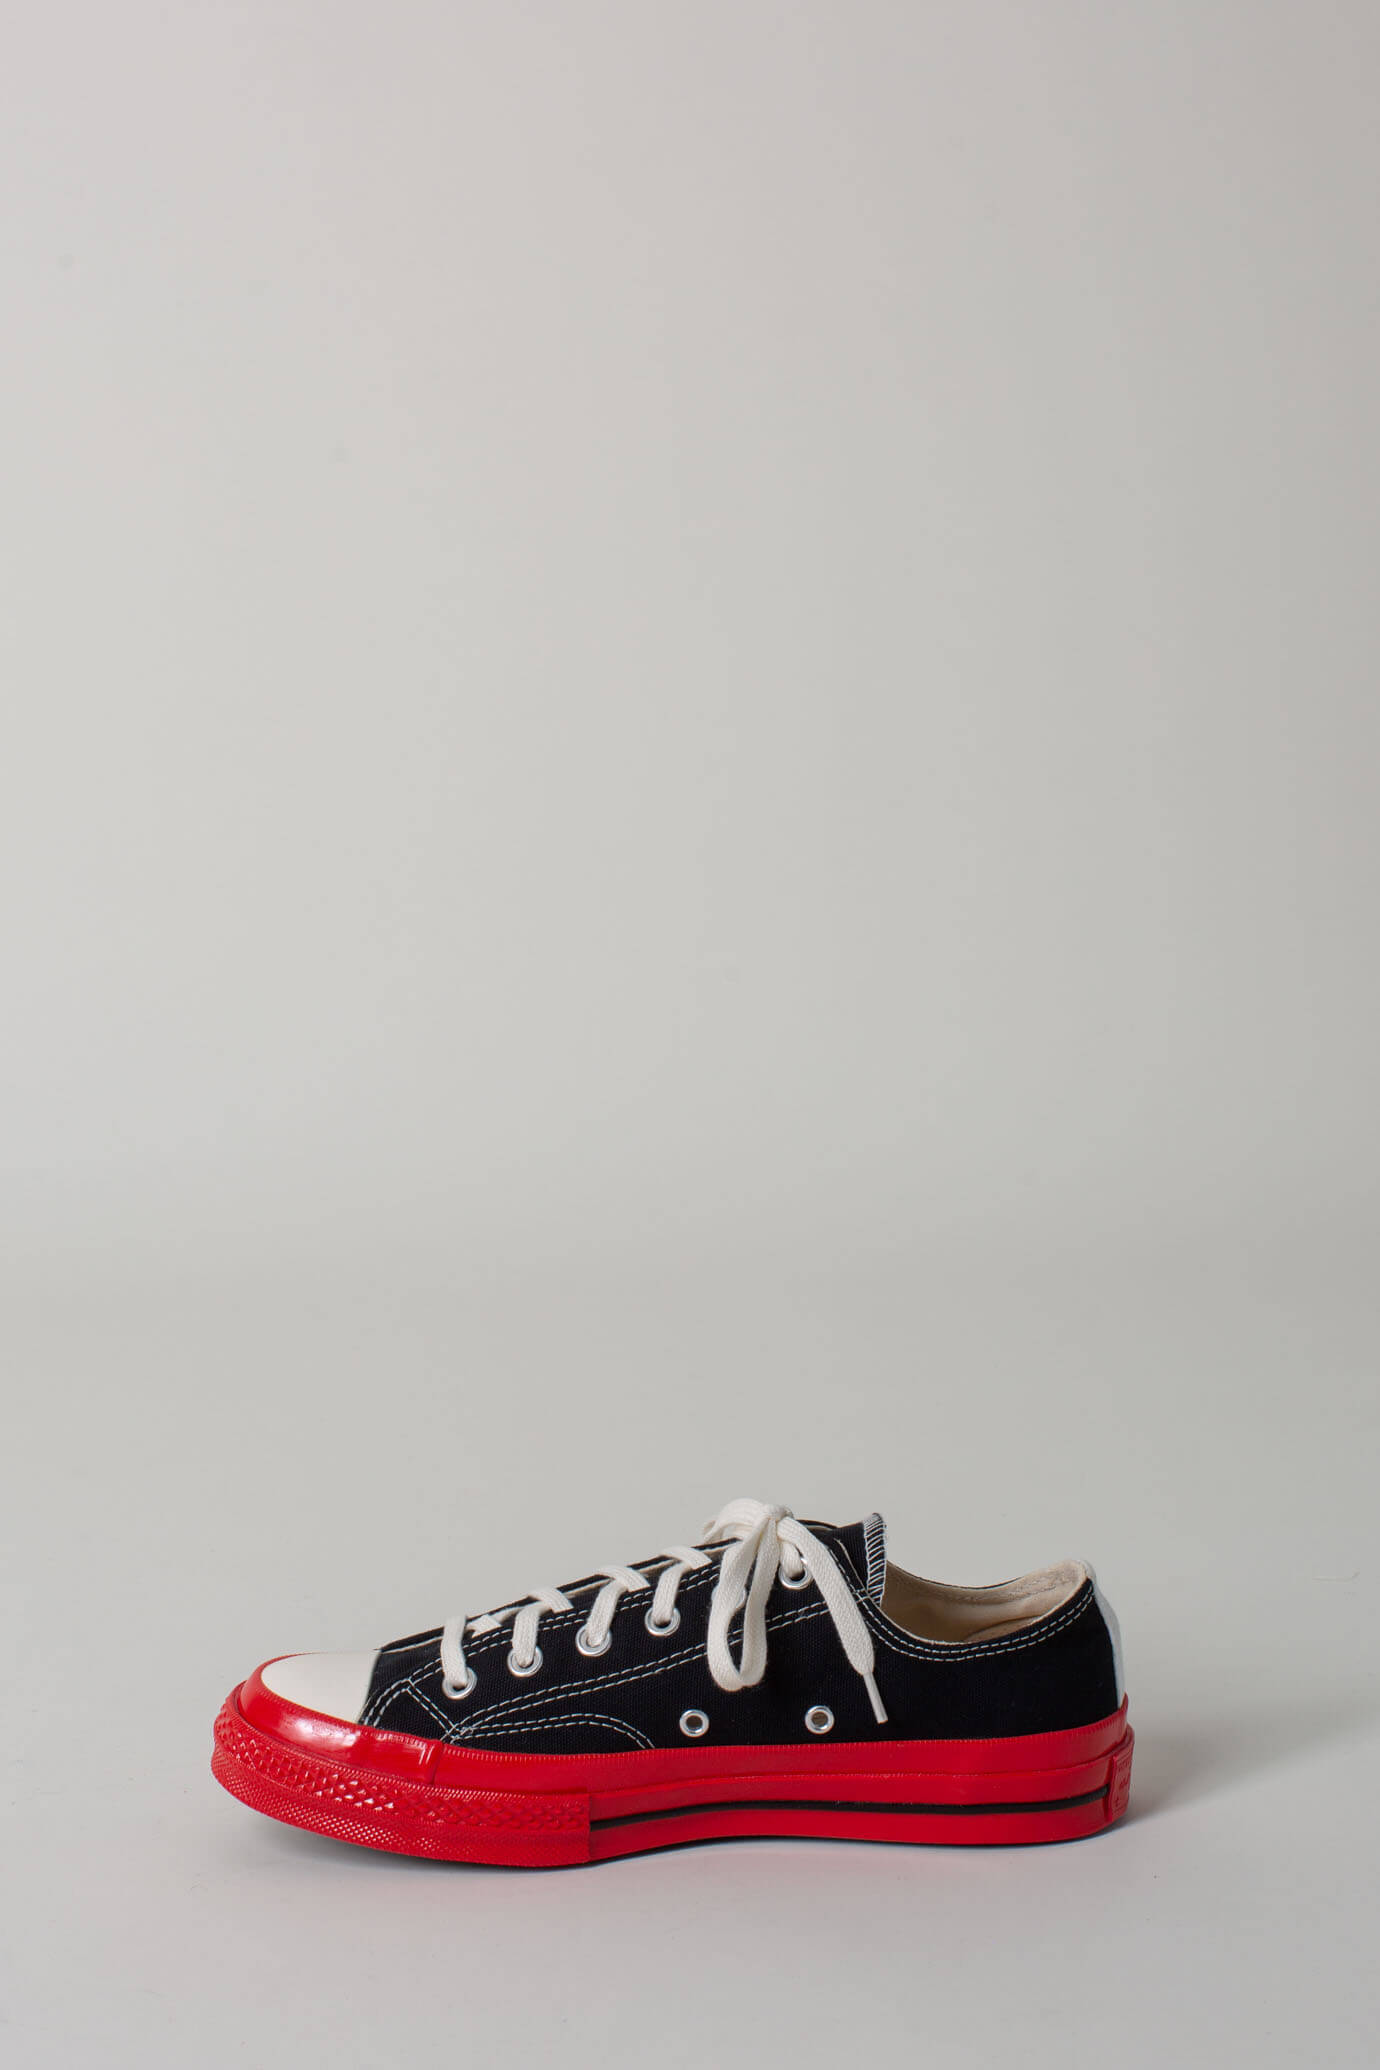 Converse CDG Play Low Red Sole